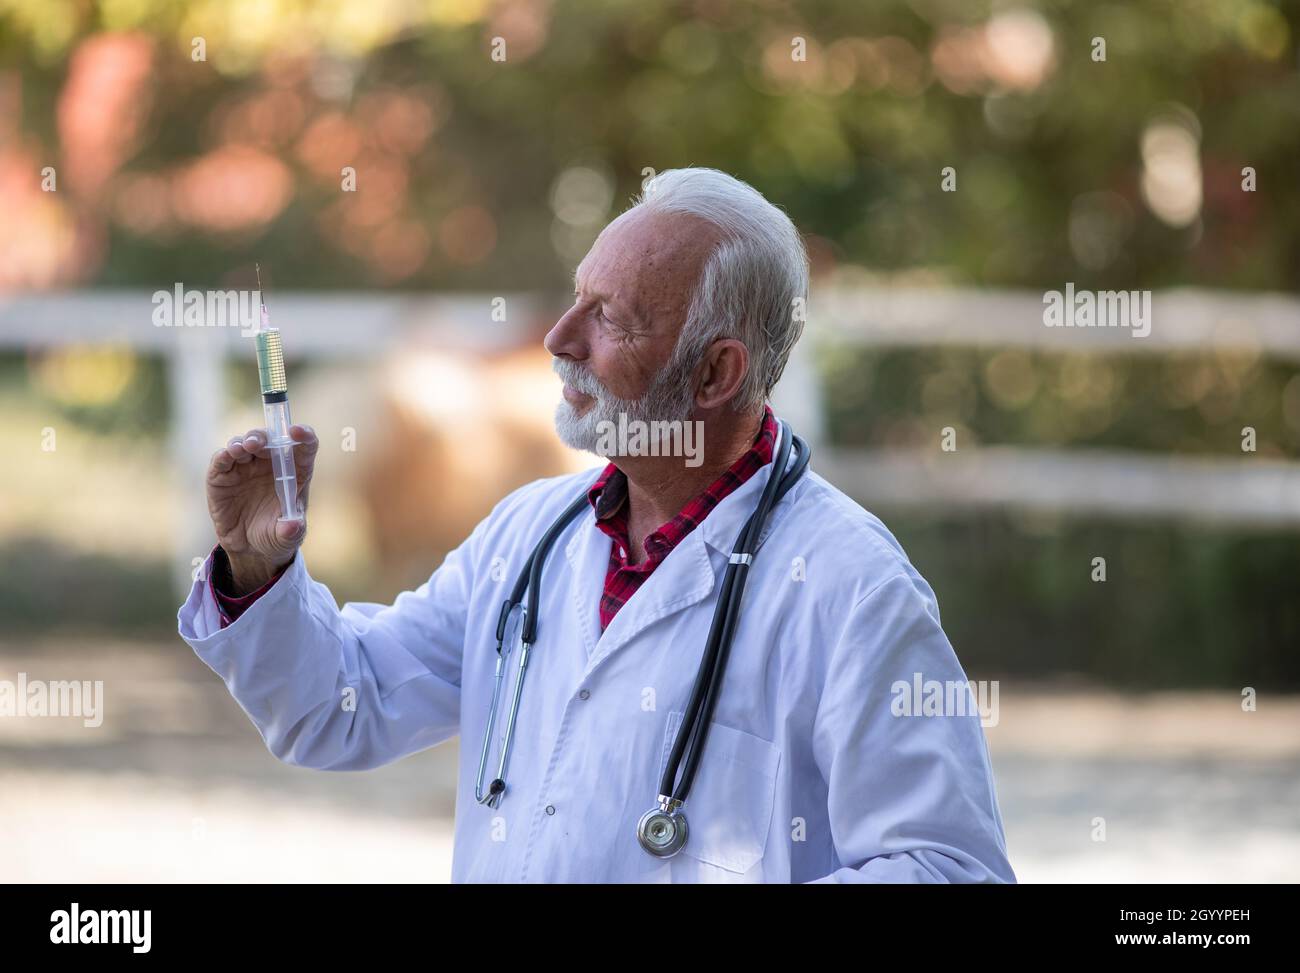 Matur eveterinarian in white coat holding syringe with needle for animal vaccination on farm Stock Photo